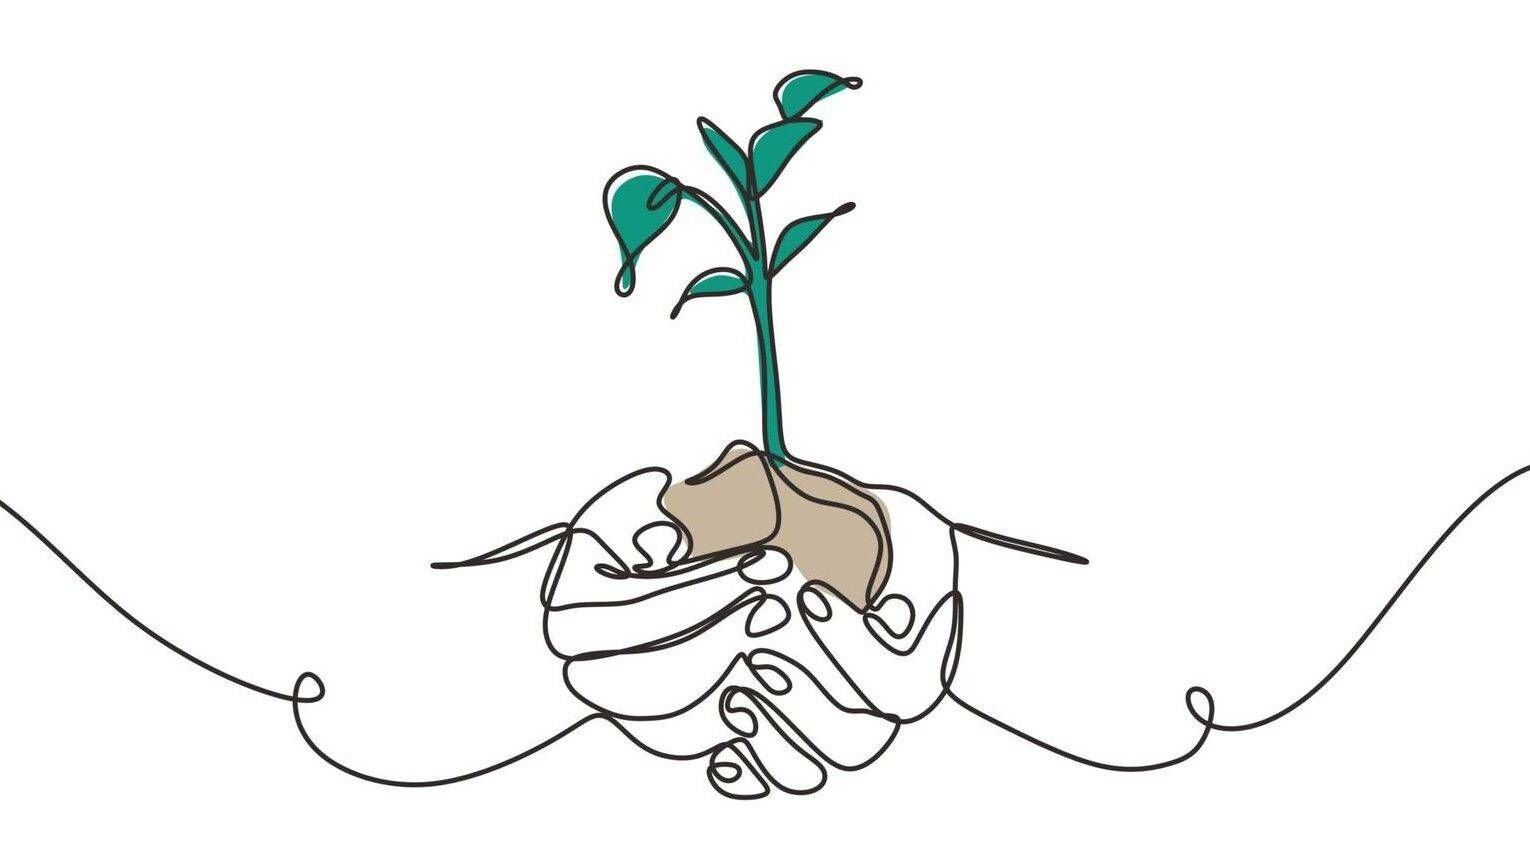 Trauma, post-traumatic growth, Rewire, PBS, Continuous one line drawing of plant in hand. Hands holding nature sign and symbol vector illustration. Minimalism design and simplicity sketch hand drawn.